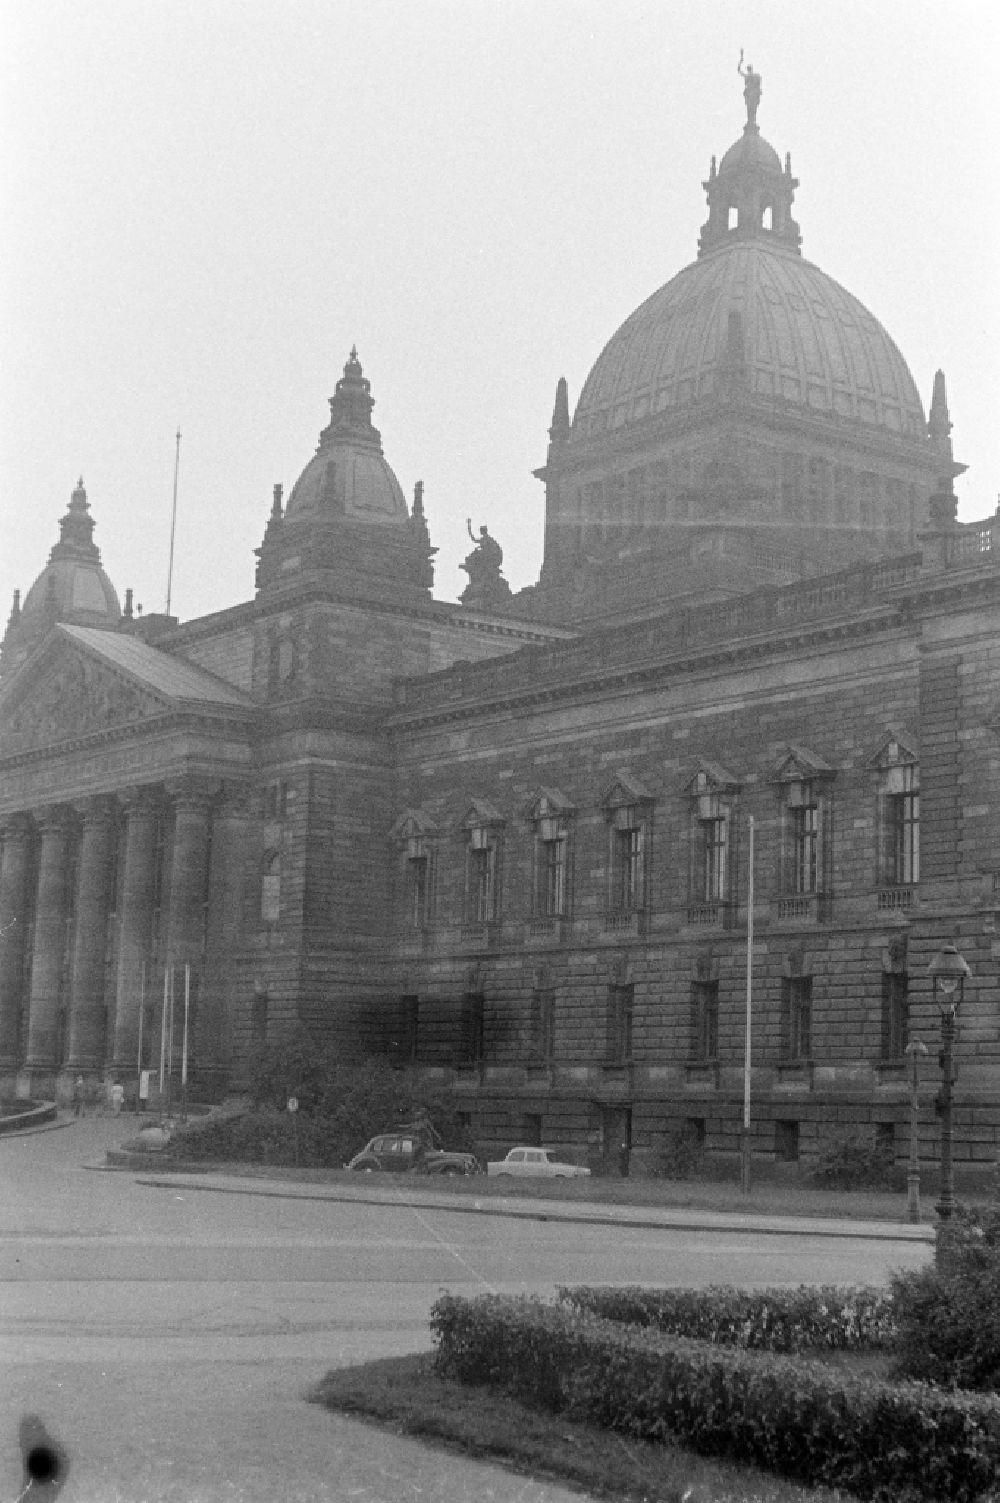 GDR image archive: Leipzig - Museum exhibition of the Dimitroff Museum in the former Reich Court building (today the headquarters of the Federal Administrative Court) on Simsonplatz in the Mitte district of Leipzig, Saxony in the territory of the former GDR, German Democratic Republic